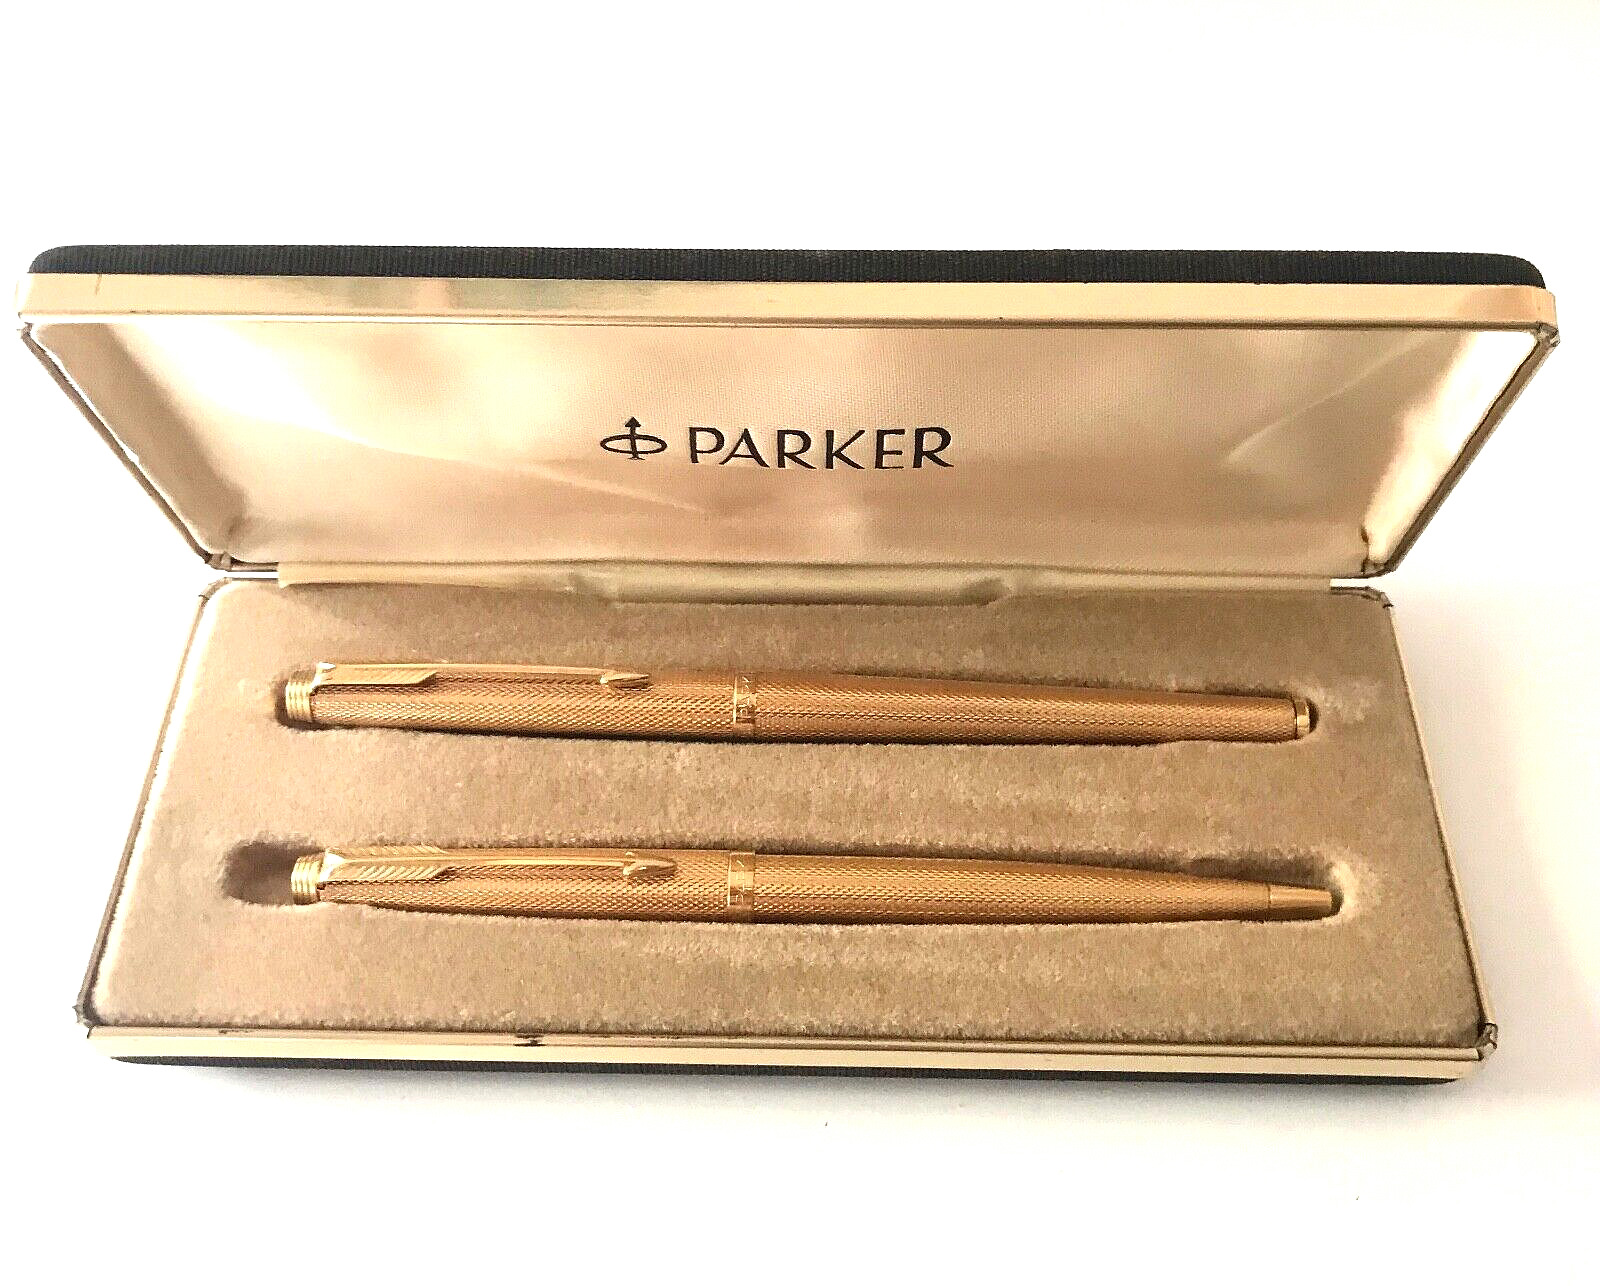 PARKER 180 BARLEY CORN CLASSIC FOUNTAIN & BALLPOINT PEN , MADE IN FRANCE 1980